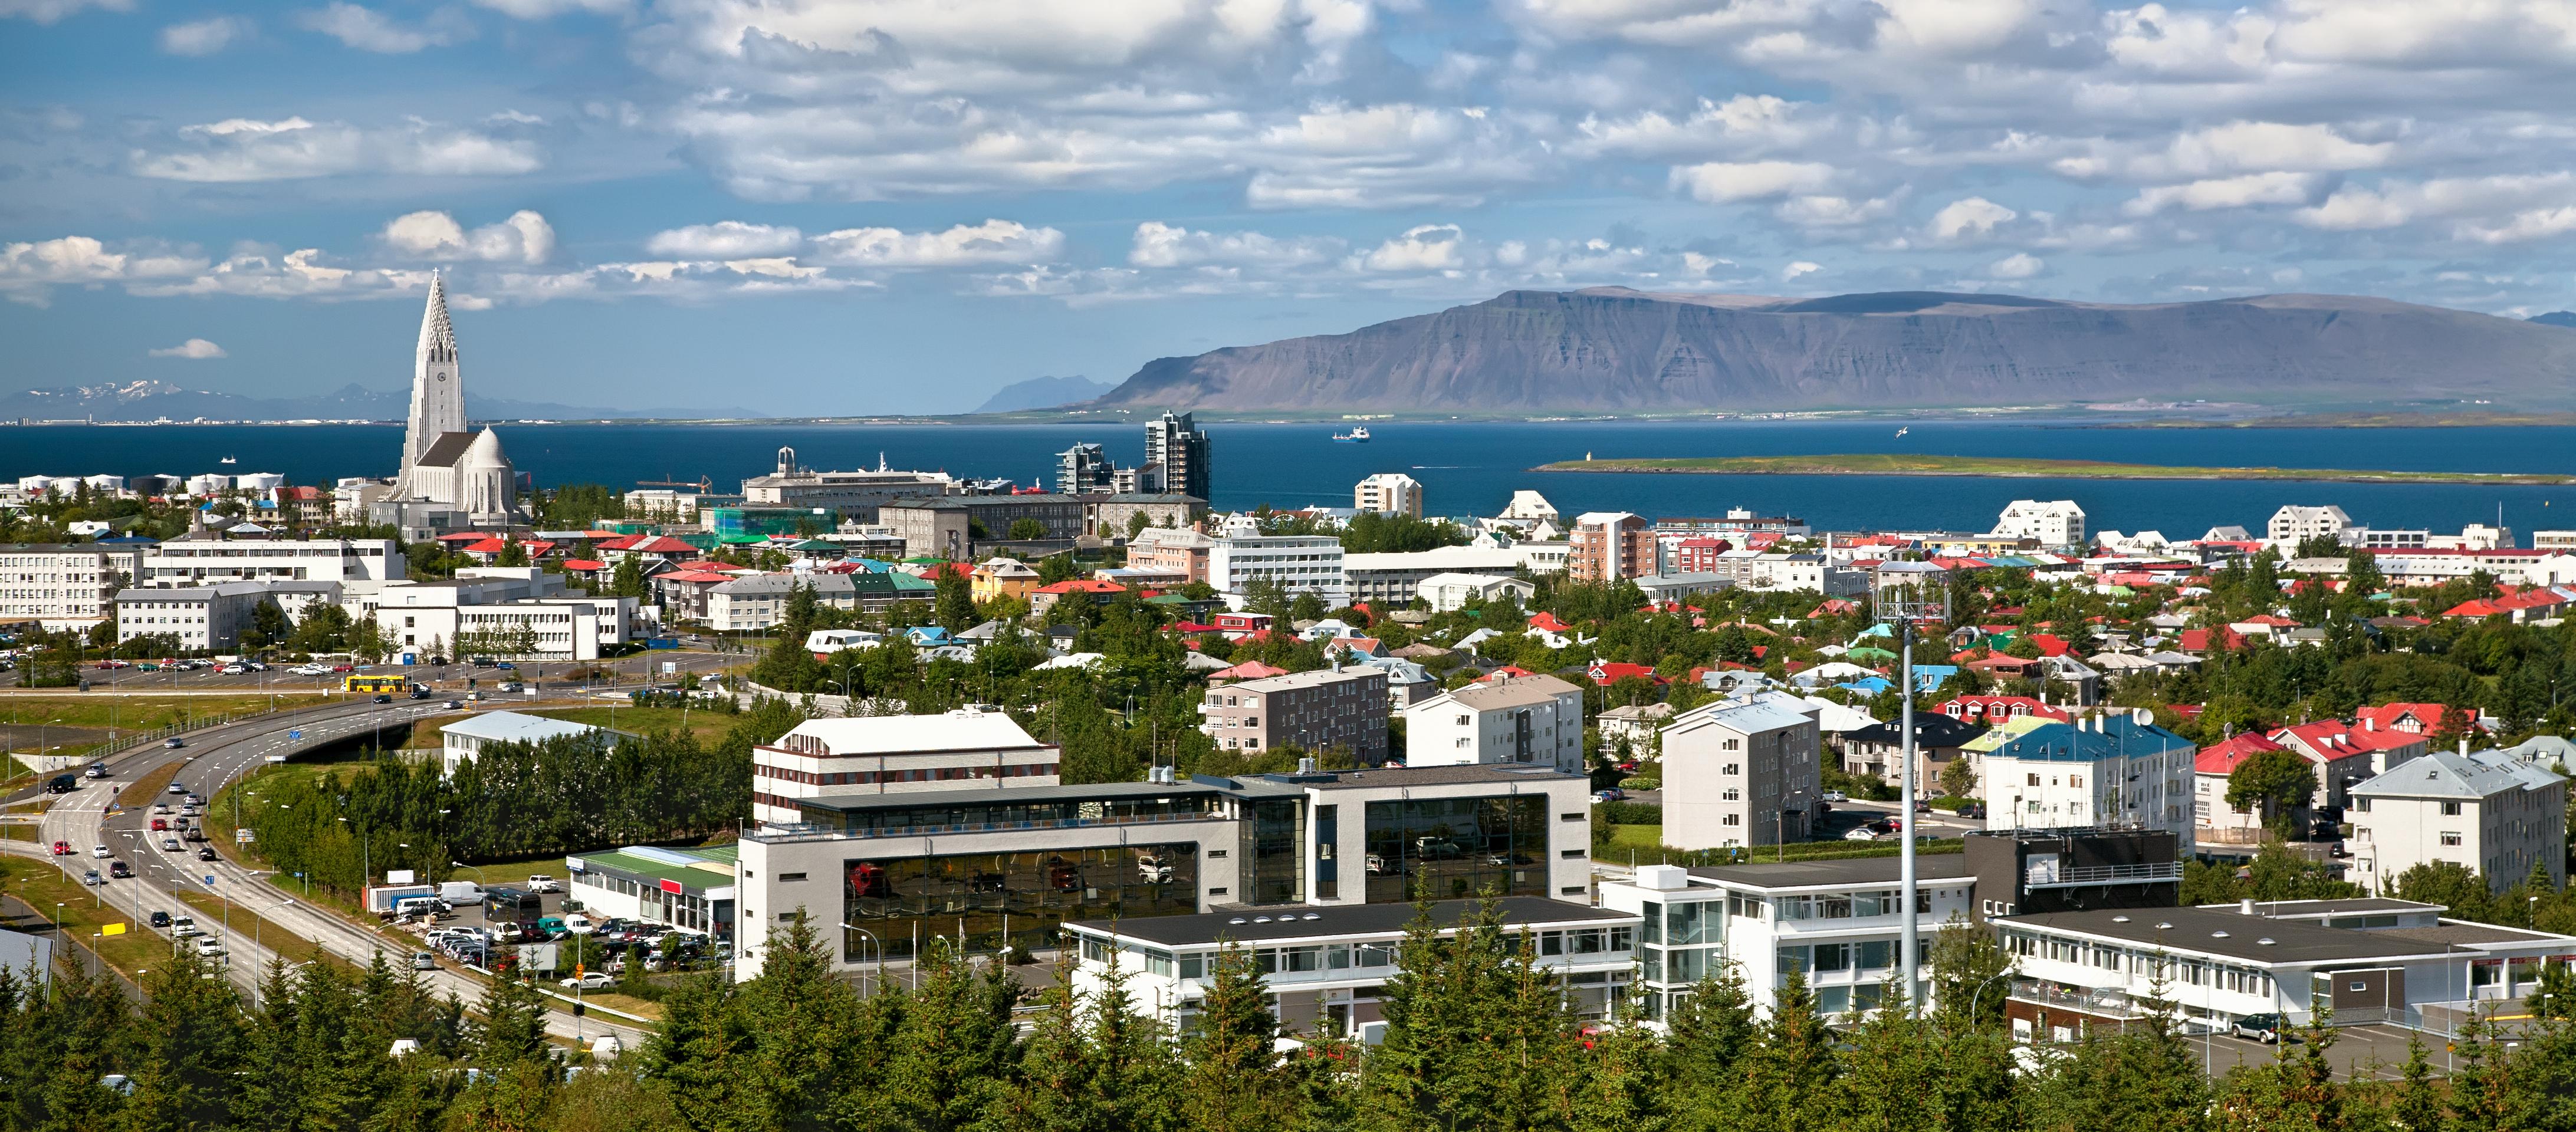 Guided tour of Reykjavik by minibus and on foot